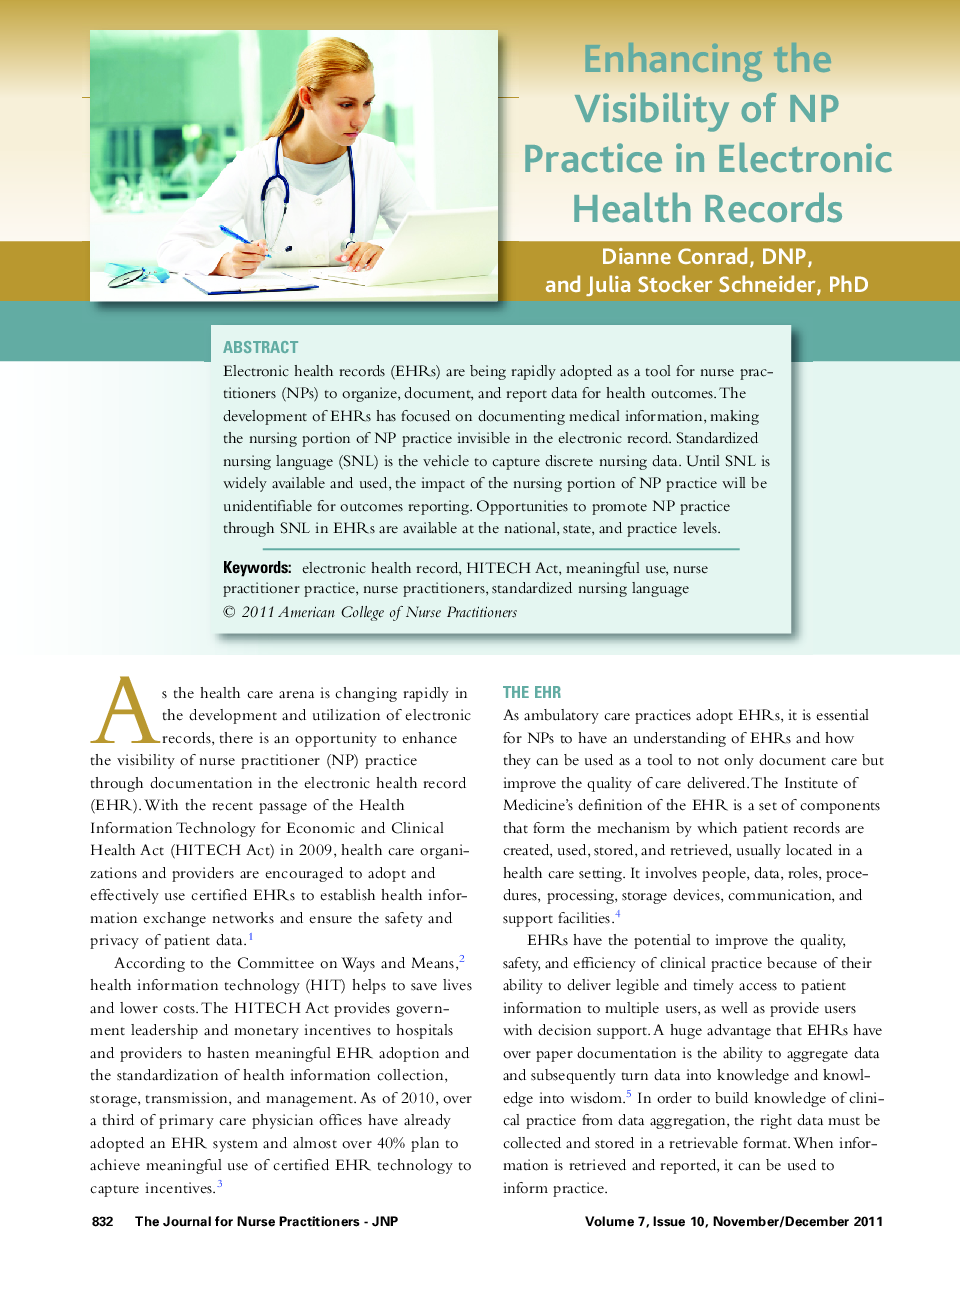 Enhancing the Visibility of NP Practice in Electronic Health Records